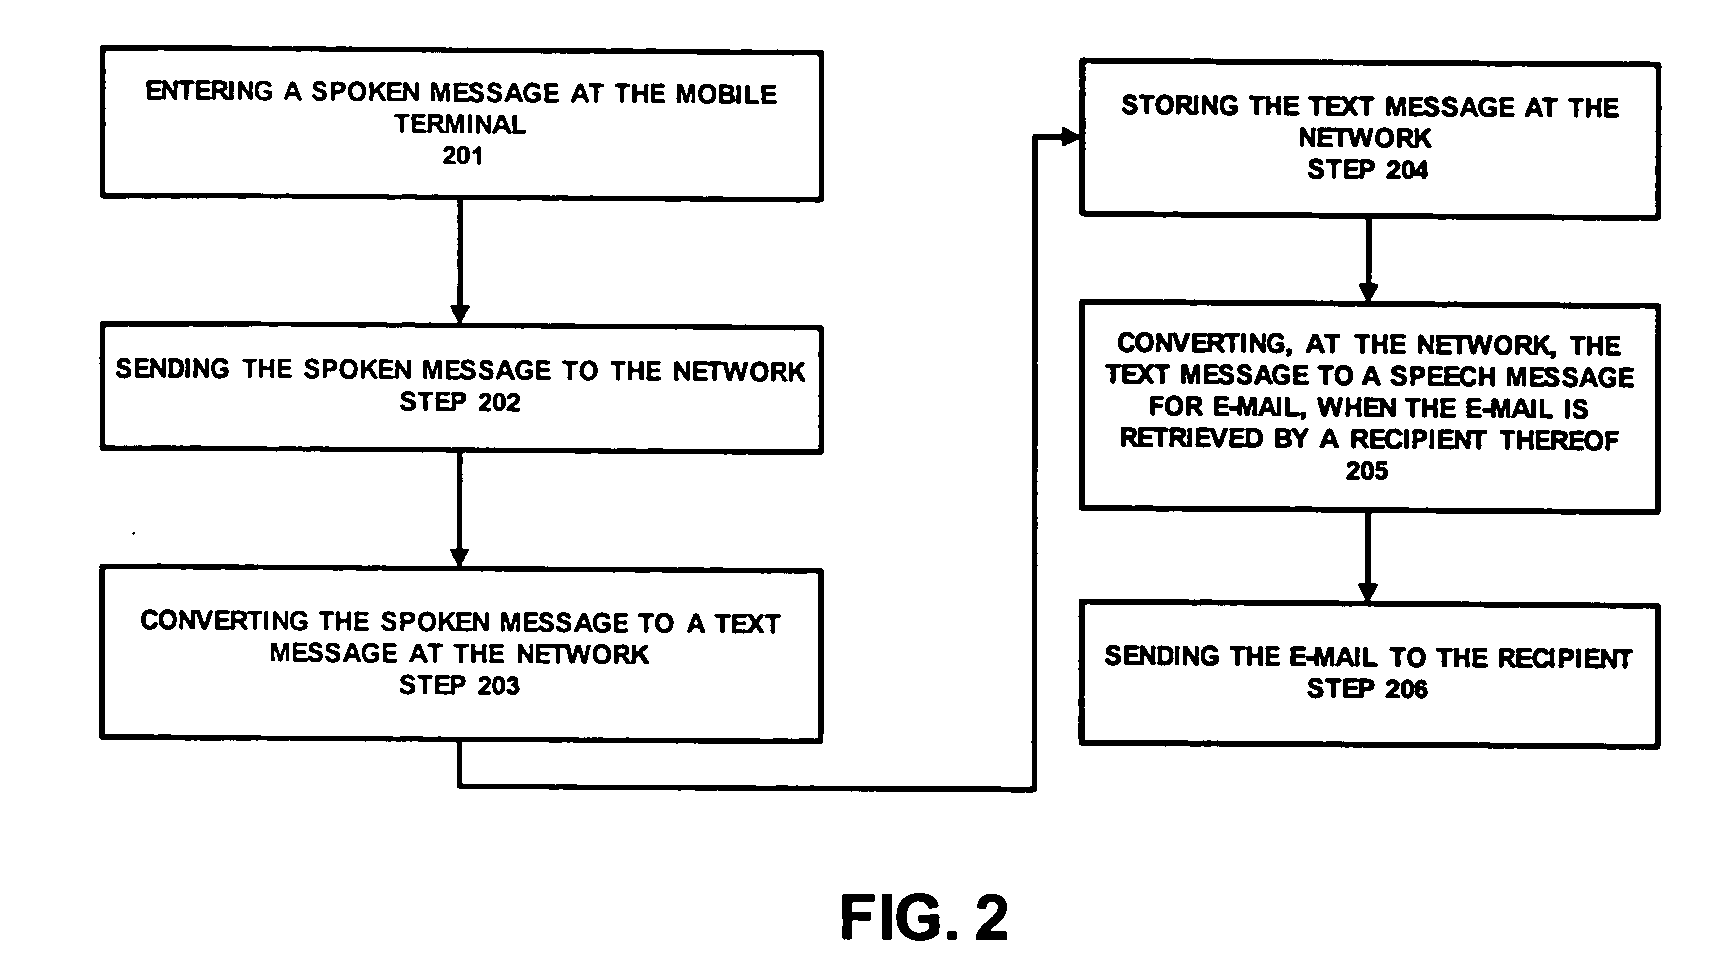 Network support for wireless e-mail using speech-to-text conversion